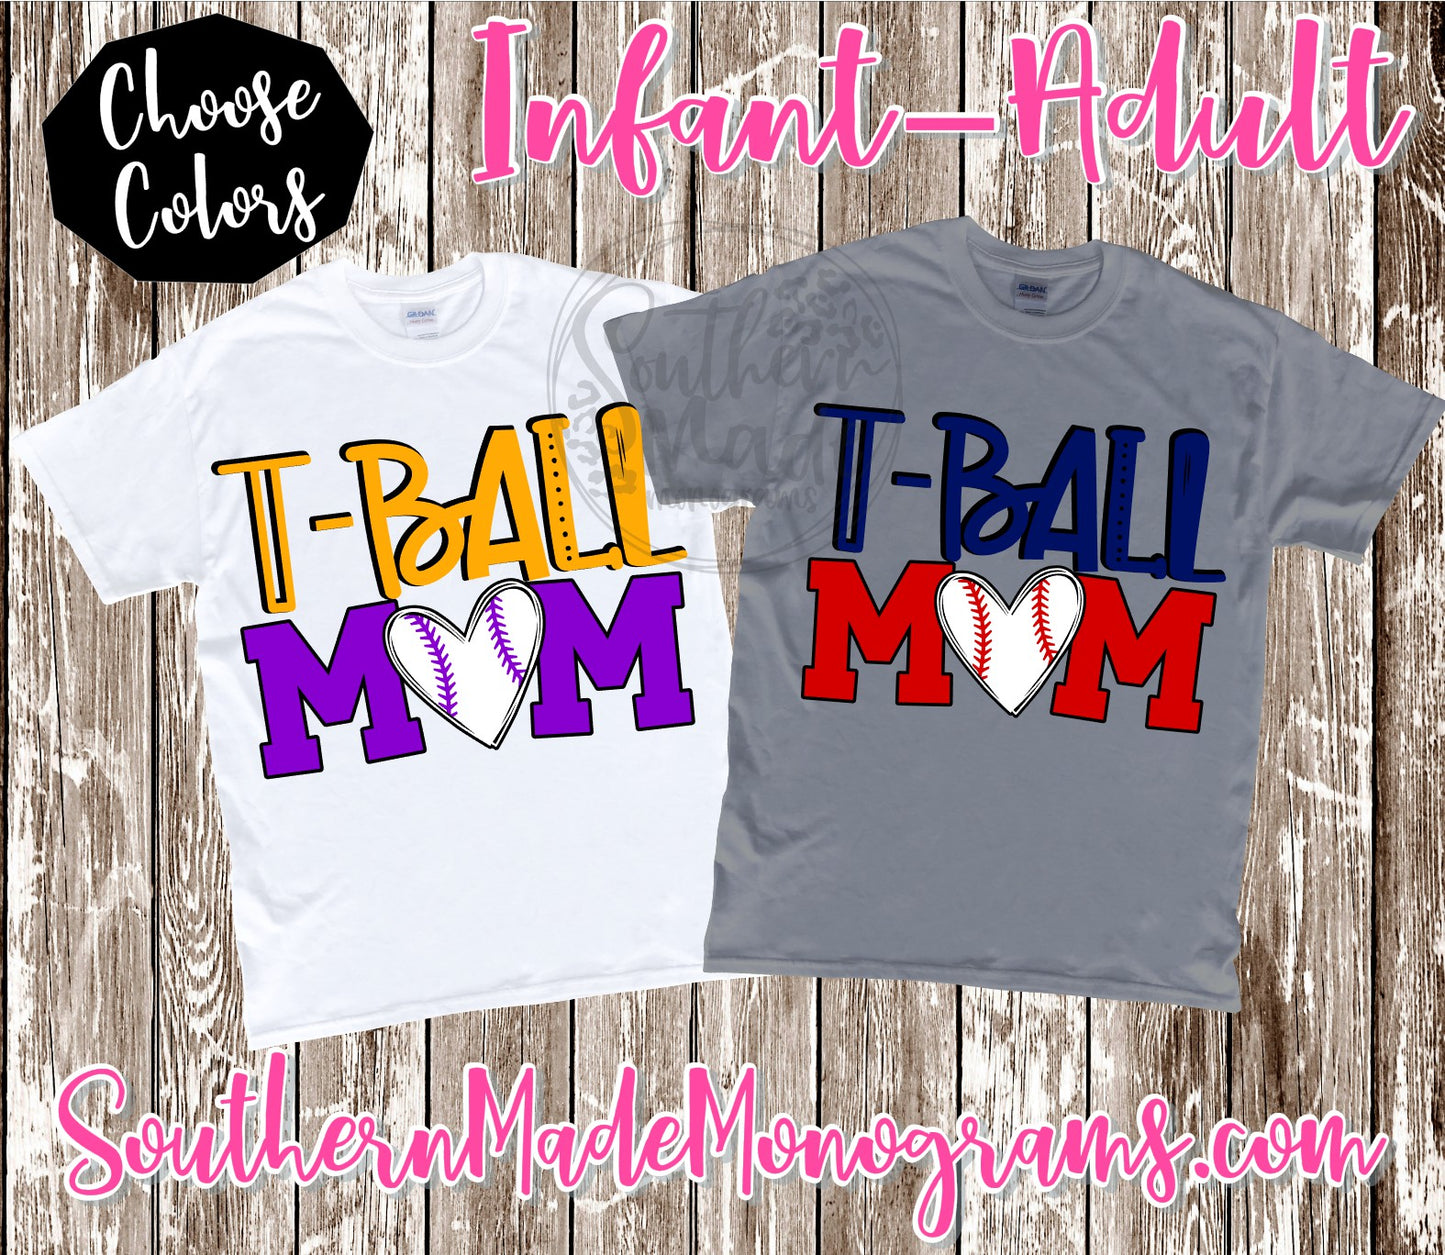 T-Ball Mom - All Sizes - Choose Colors - Comes in a tee, tank or raglan